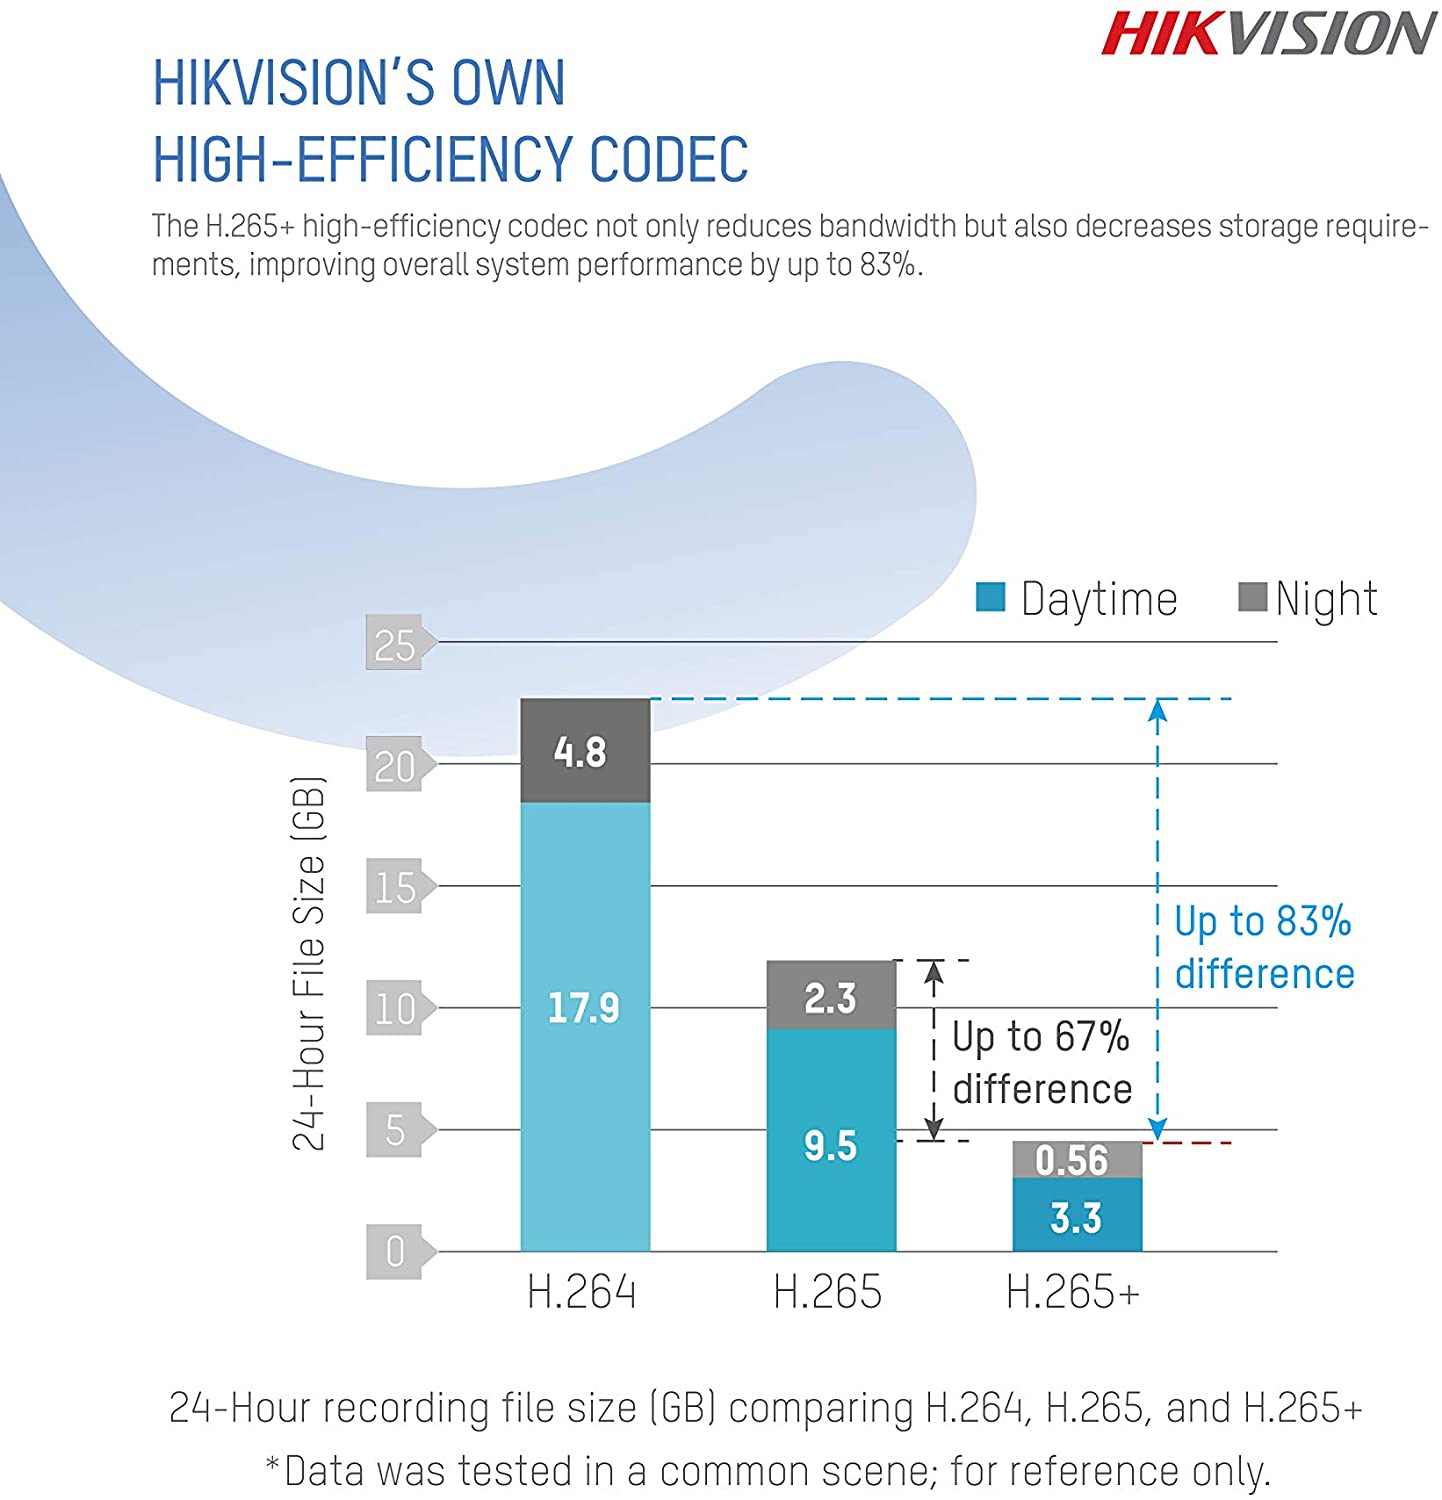 HIKVISION HILOOK NVR 4CH, Home Security Network Recorder CCTV Camera